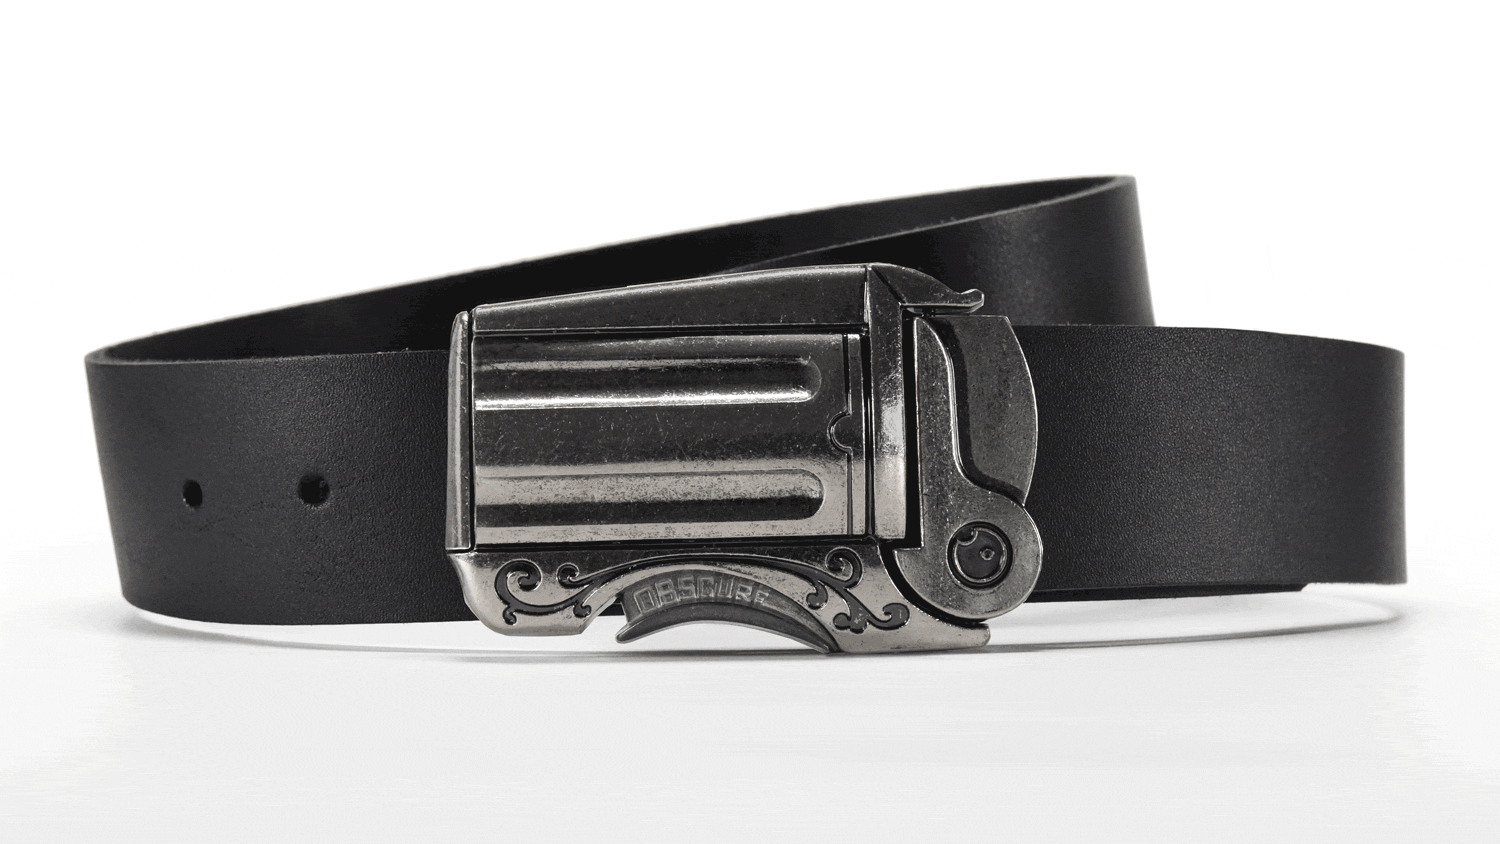 the outlaw gun belt buckle on black leather belt opens with a bang when you pull the trigger